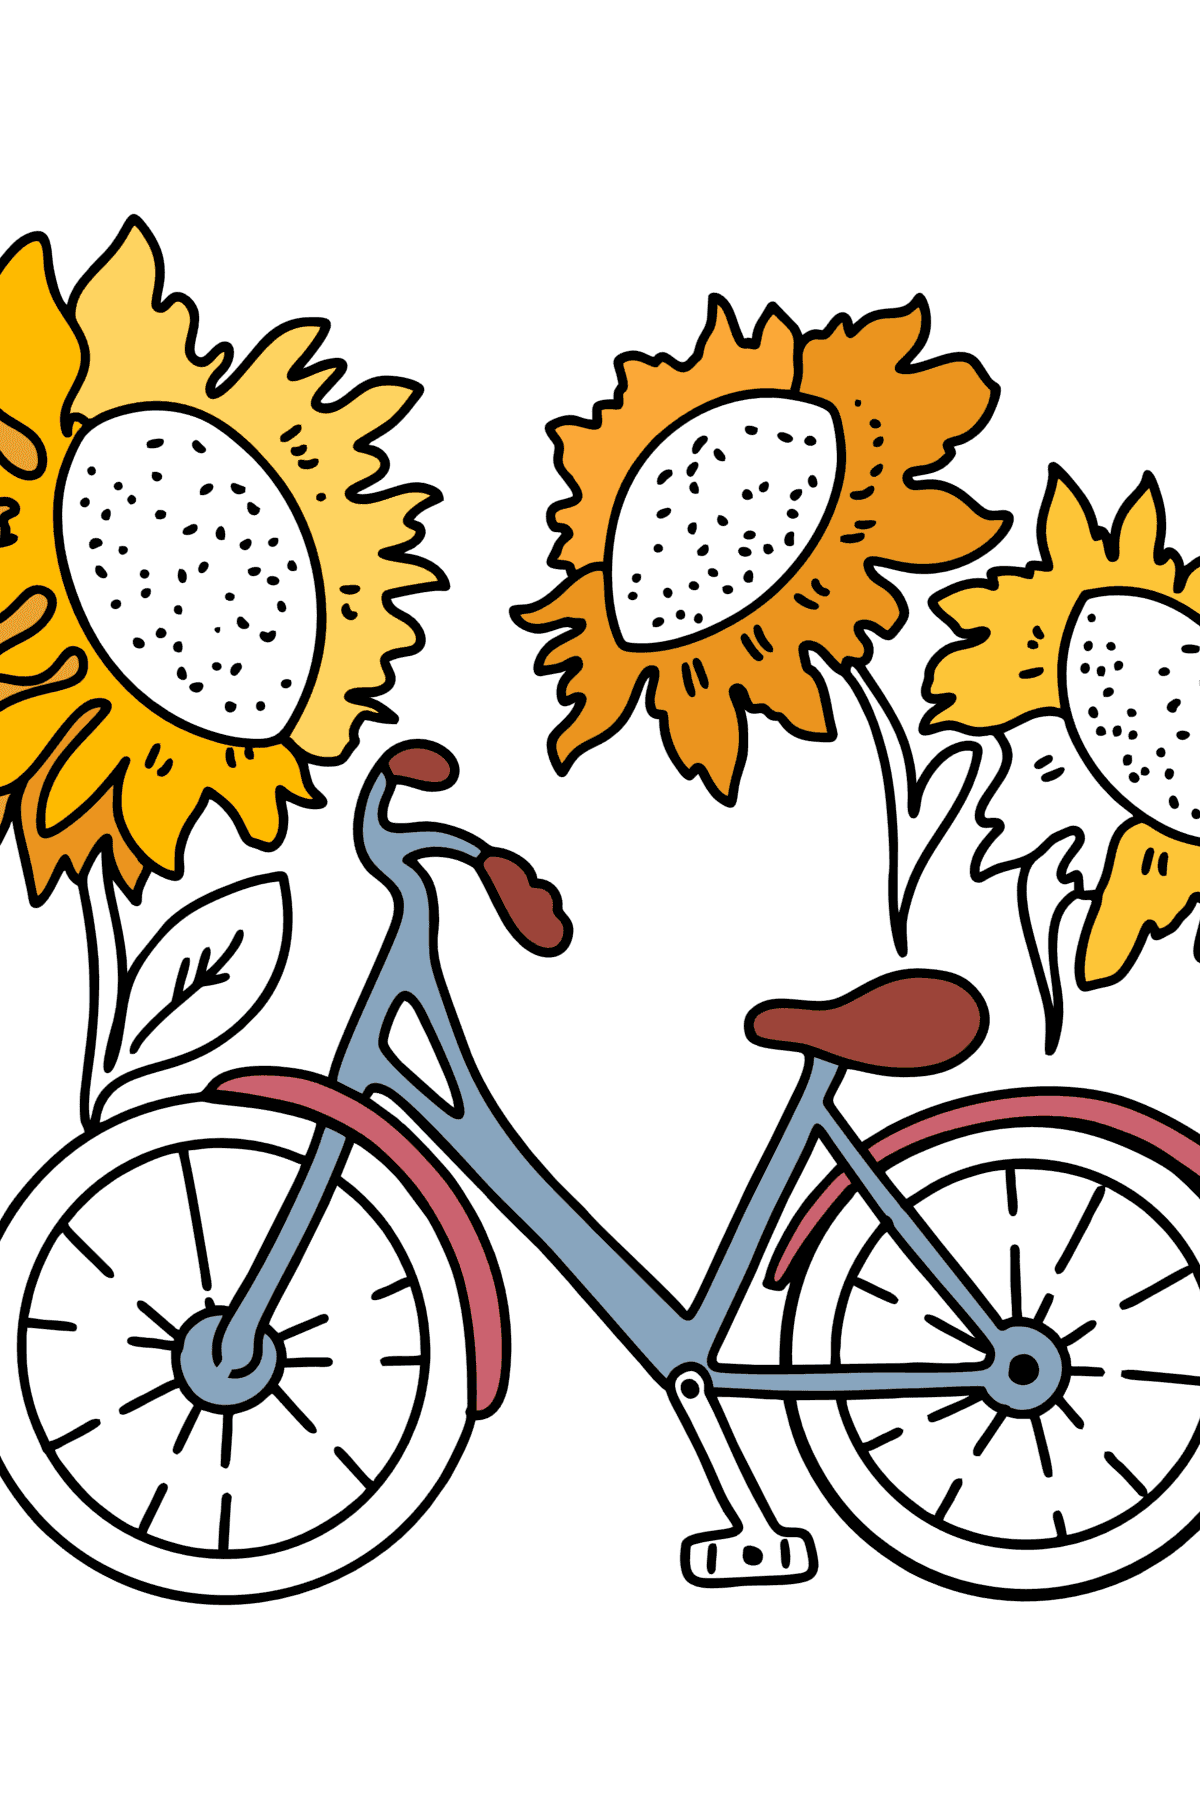 Summer Coloring page - Bicycle and Sunflowers - Coloring Pages for Kids